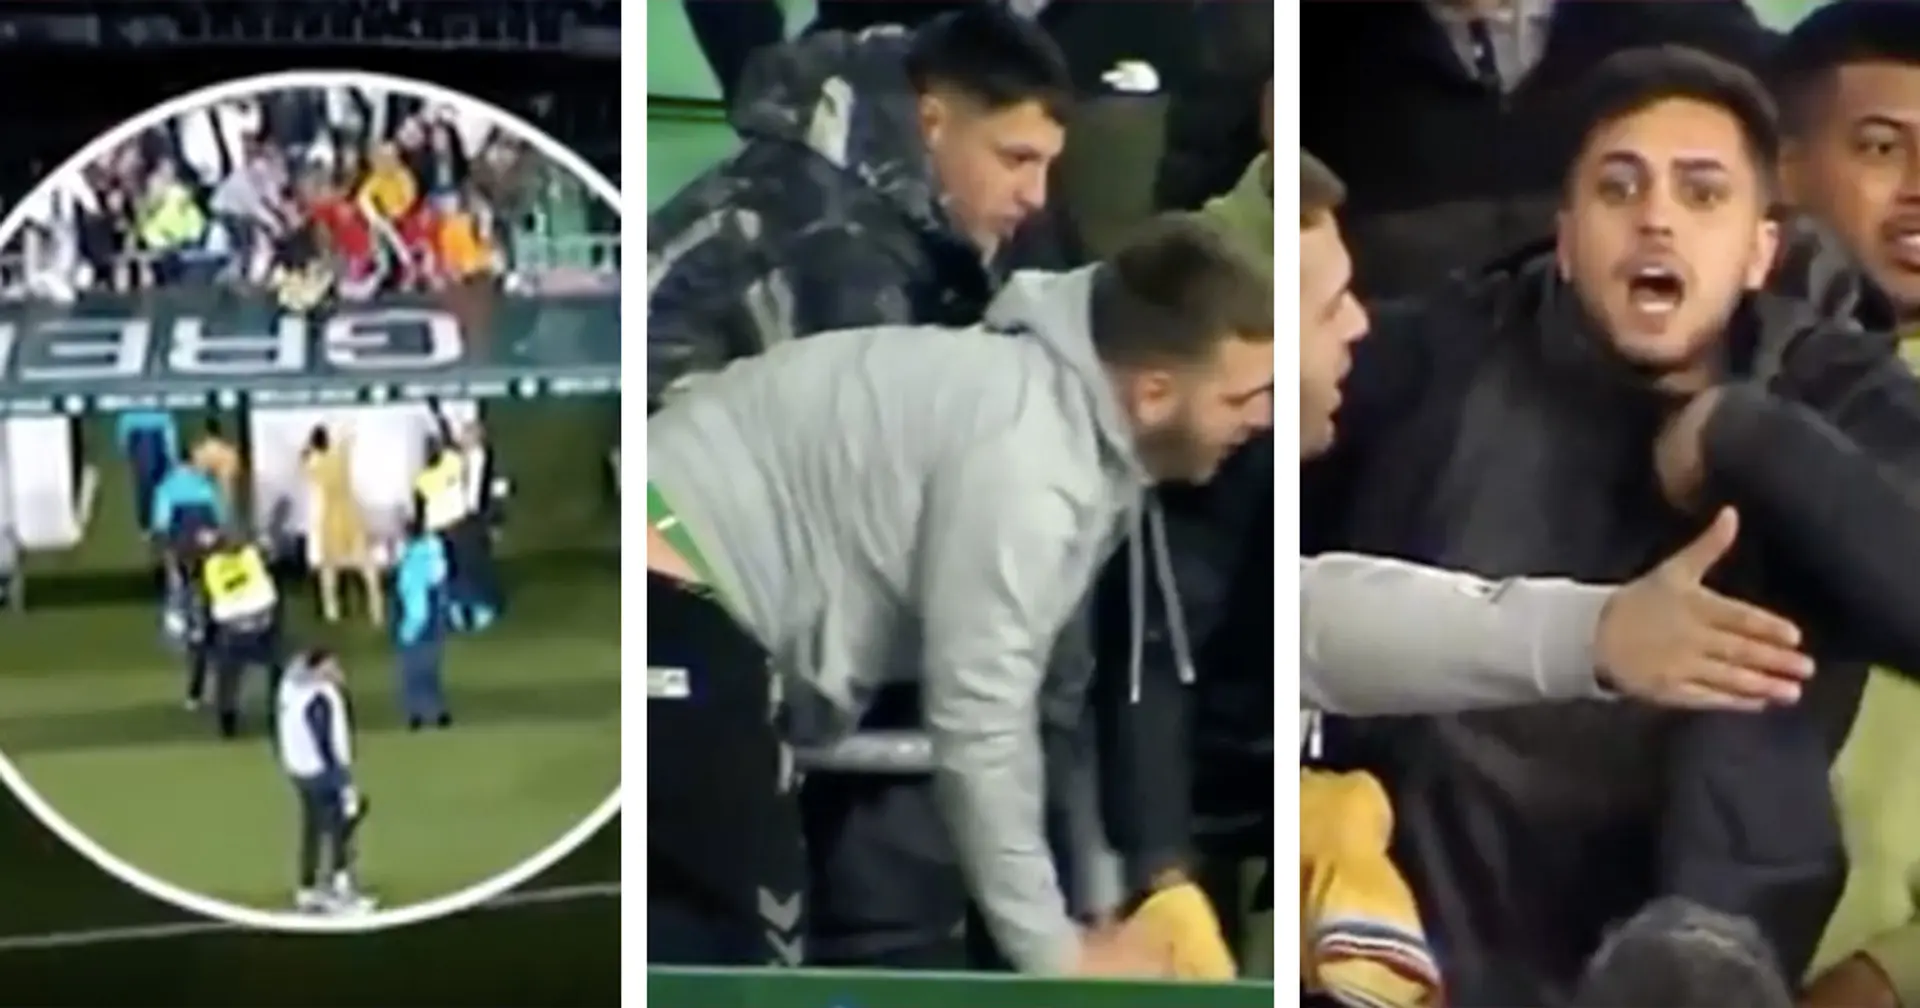 Caught on camera: Betis fans fighting over Gavi jersey in the stands